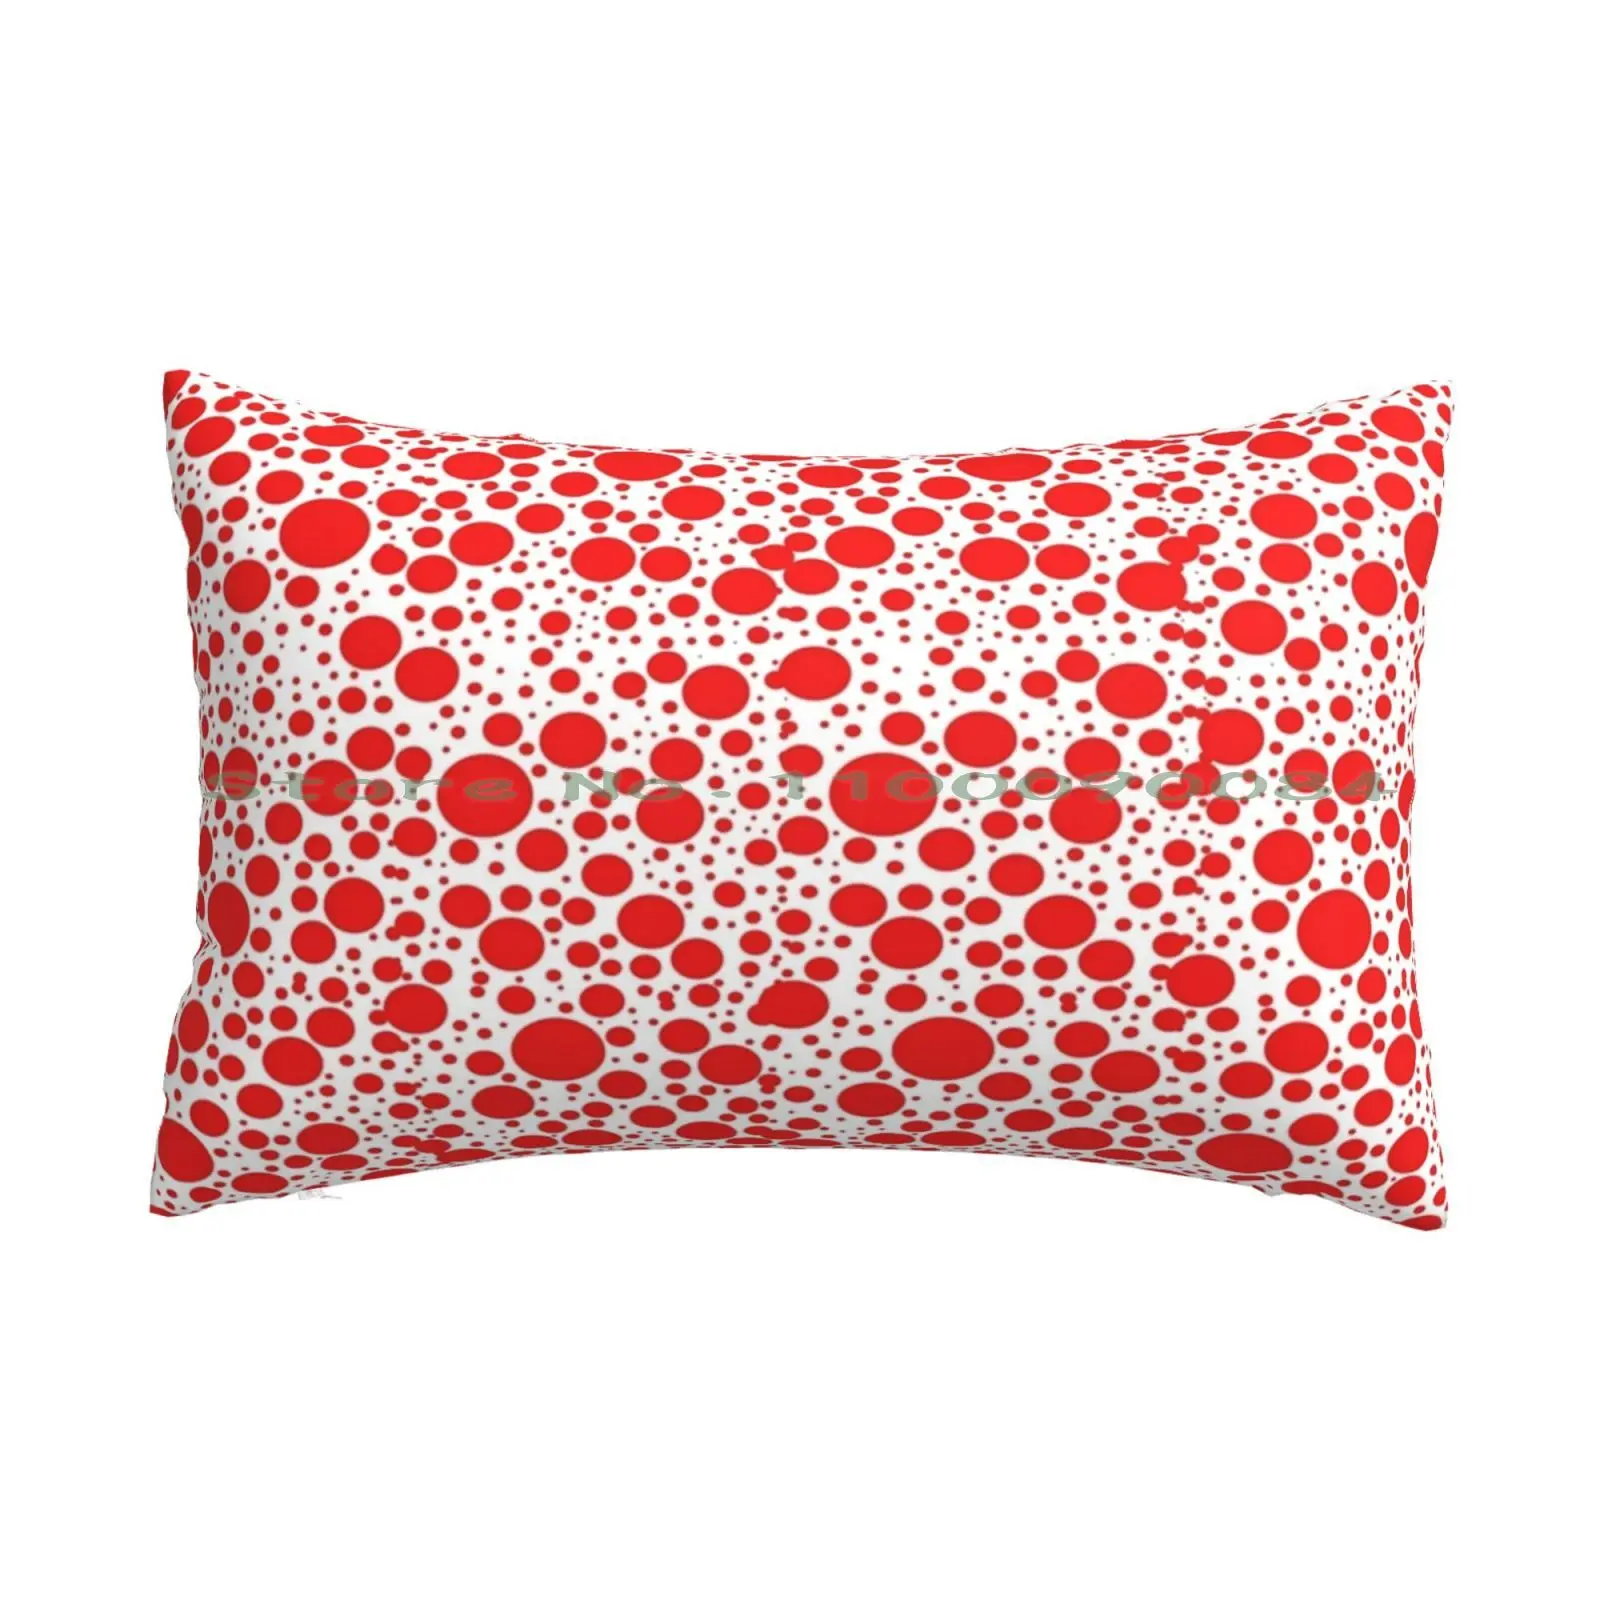 

Red Polka Dots Design Pattern Pillow Case 20x30 50*75 Sofa Bedroom Airport Boeing Orlando Planes Control Tower Airplane Air